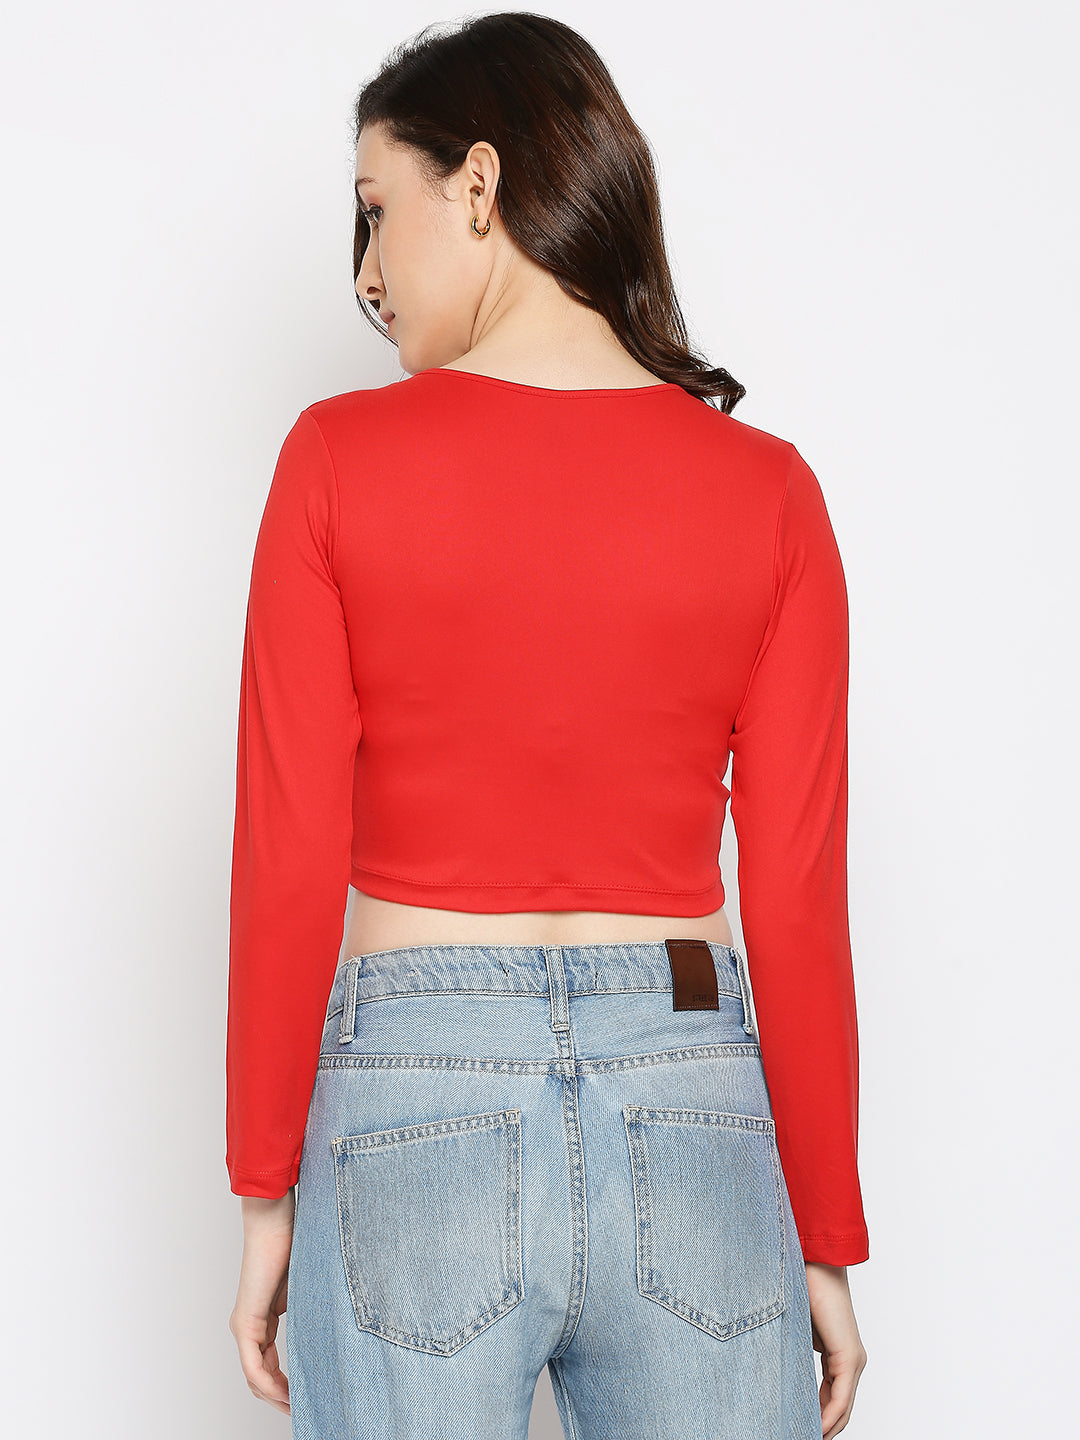 Disrupt Women Long Sleeve Solid Red Drawstring Crop Top